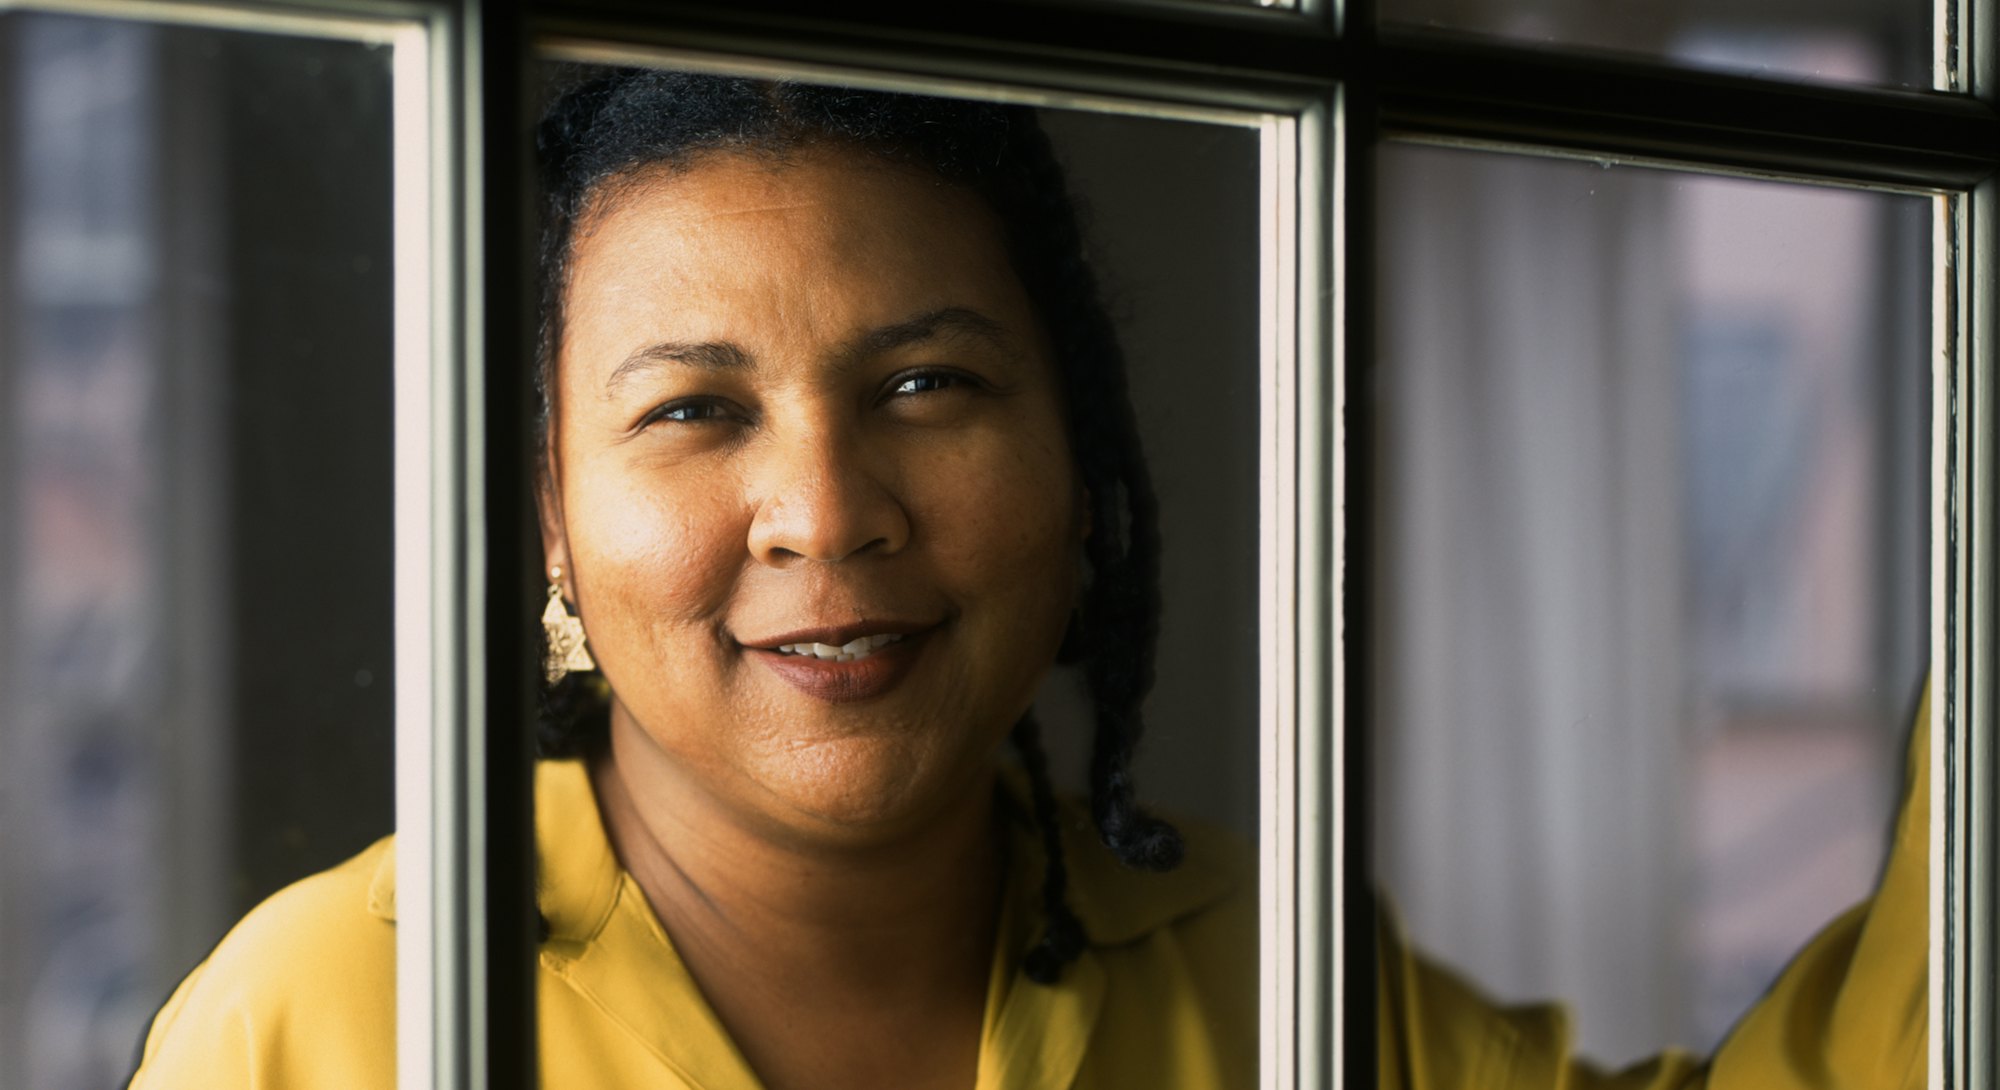 These bell hooks quotes reflect on intersectional feminism, power, and love.